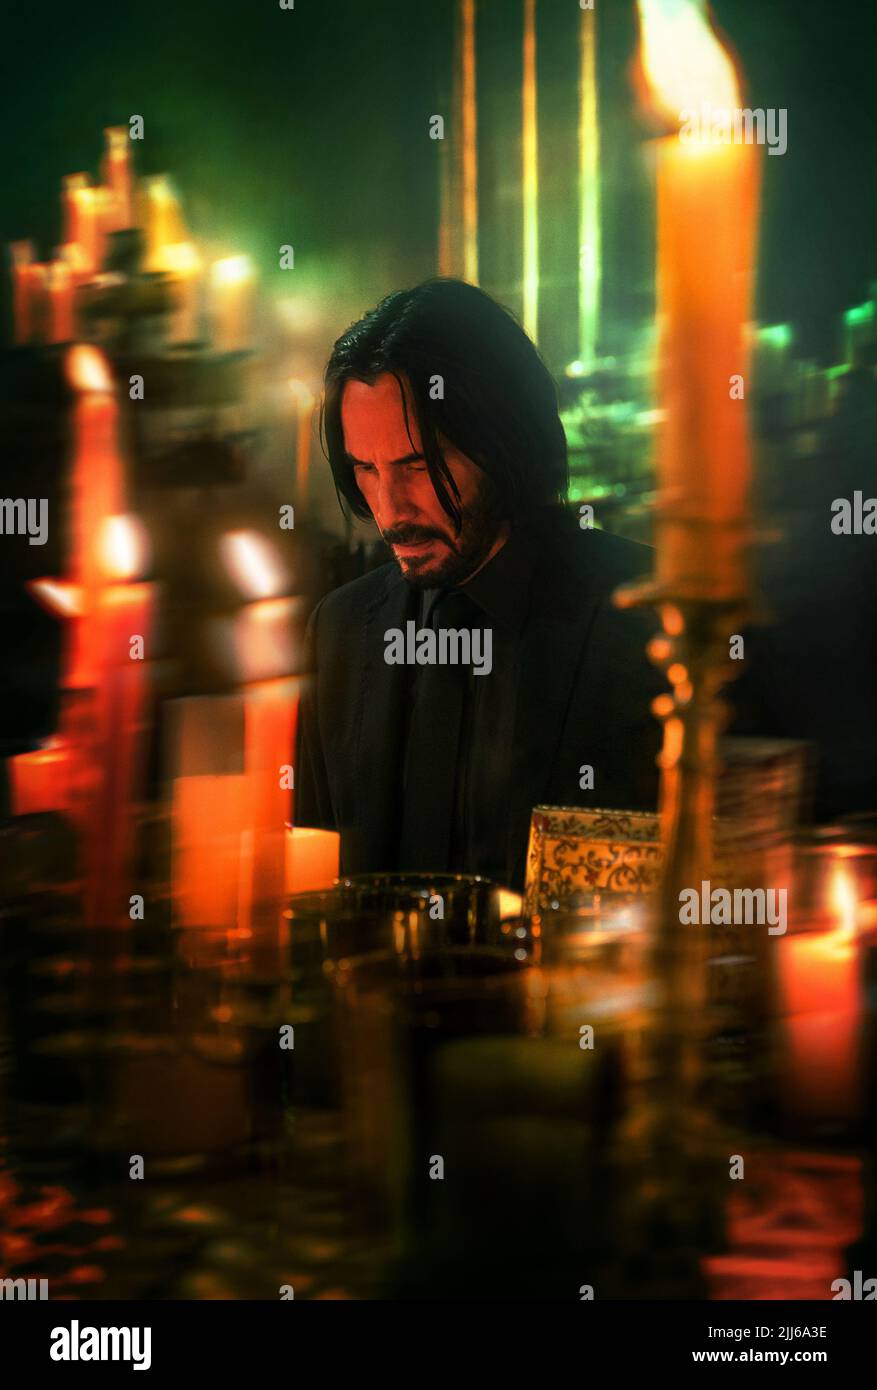 RELEASE DATE: March 24, 2023. TITLE: John Wick: Chapter 4. STUDIO: Lionsgate. DIRECTOR: Chad Stahelski. PLOT: STARRING: KEANU REEVES as John Wick. (Credit Image: © Lionsgate/Entertainment Pictures) Stock Photo